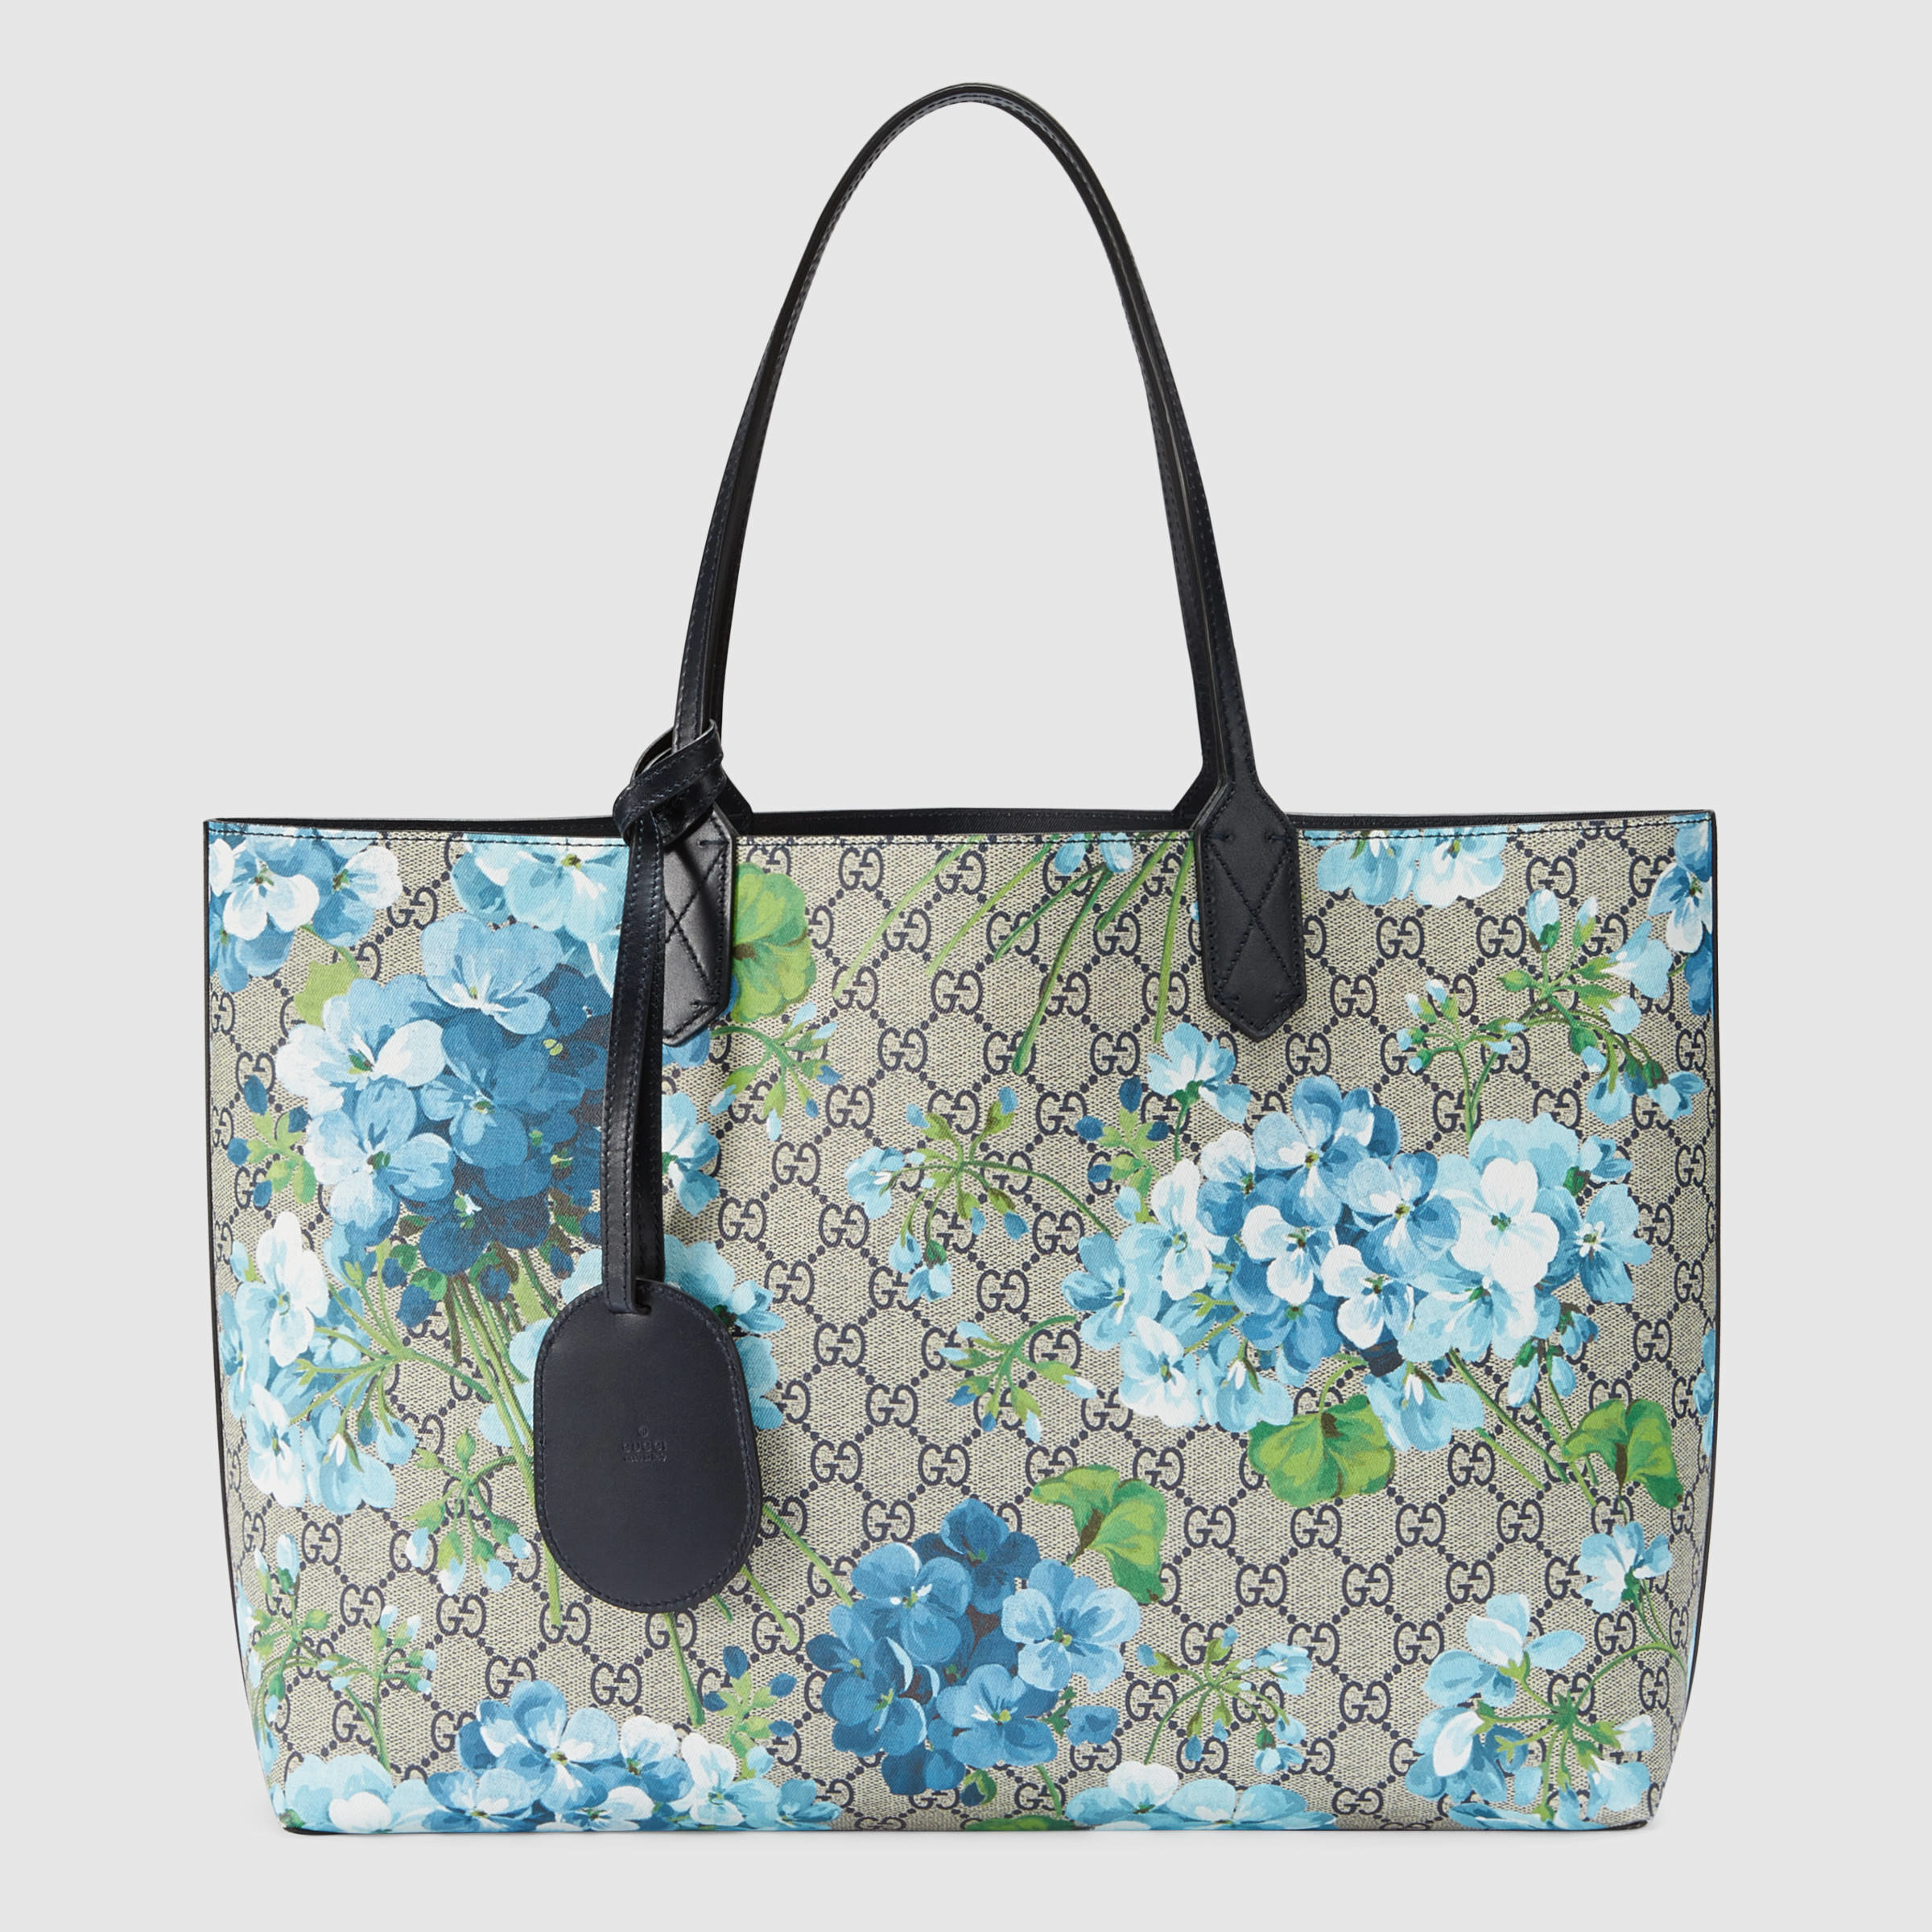 Gucci Reversible Gg Blooms Leather Tote in Floral (blue leather) | Lyst